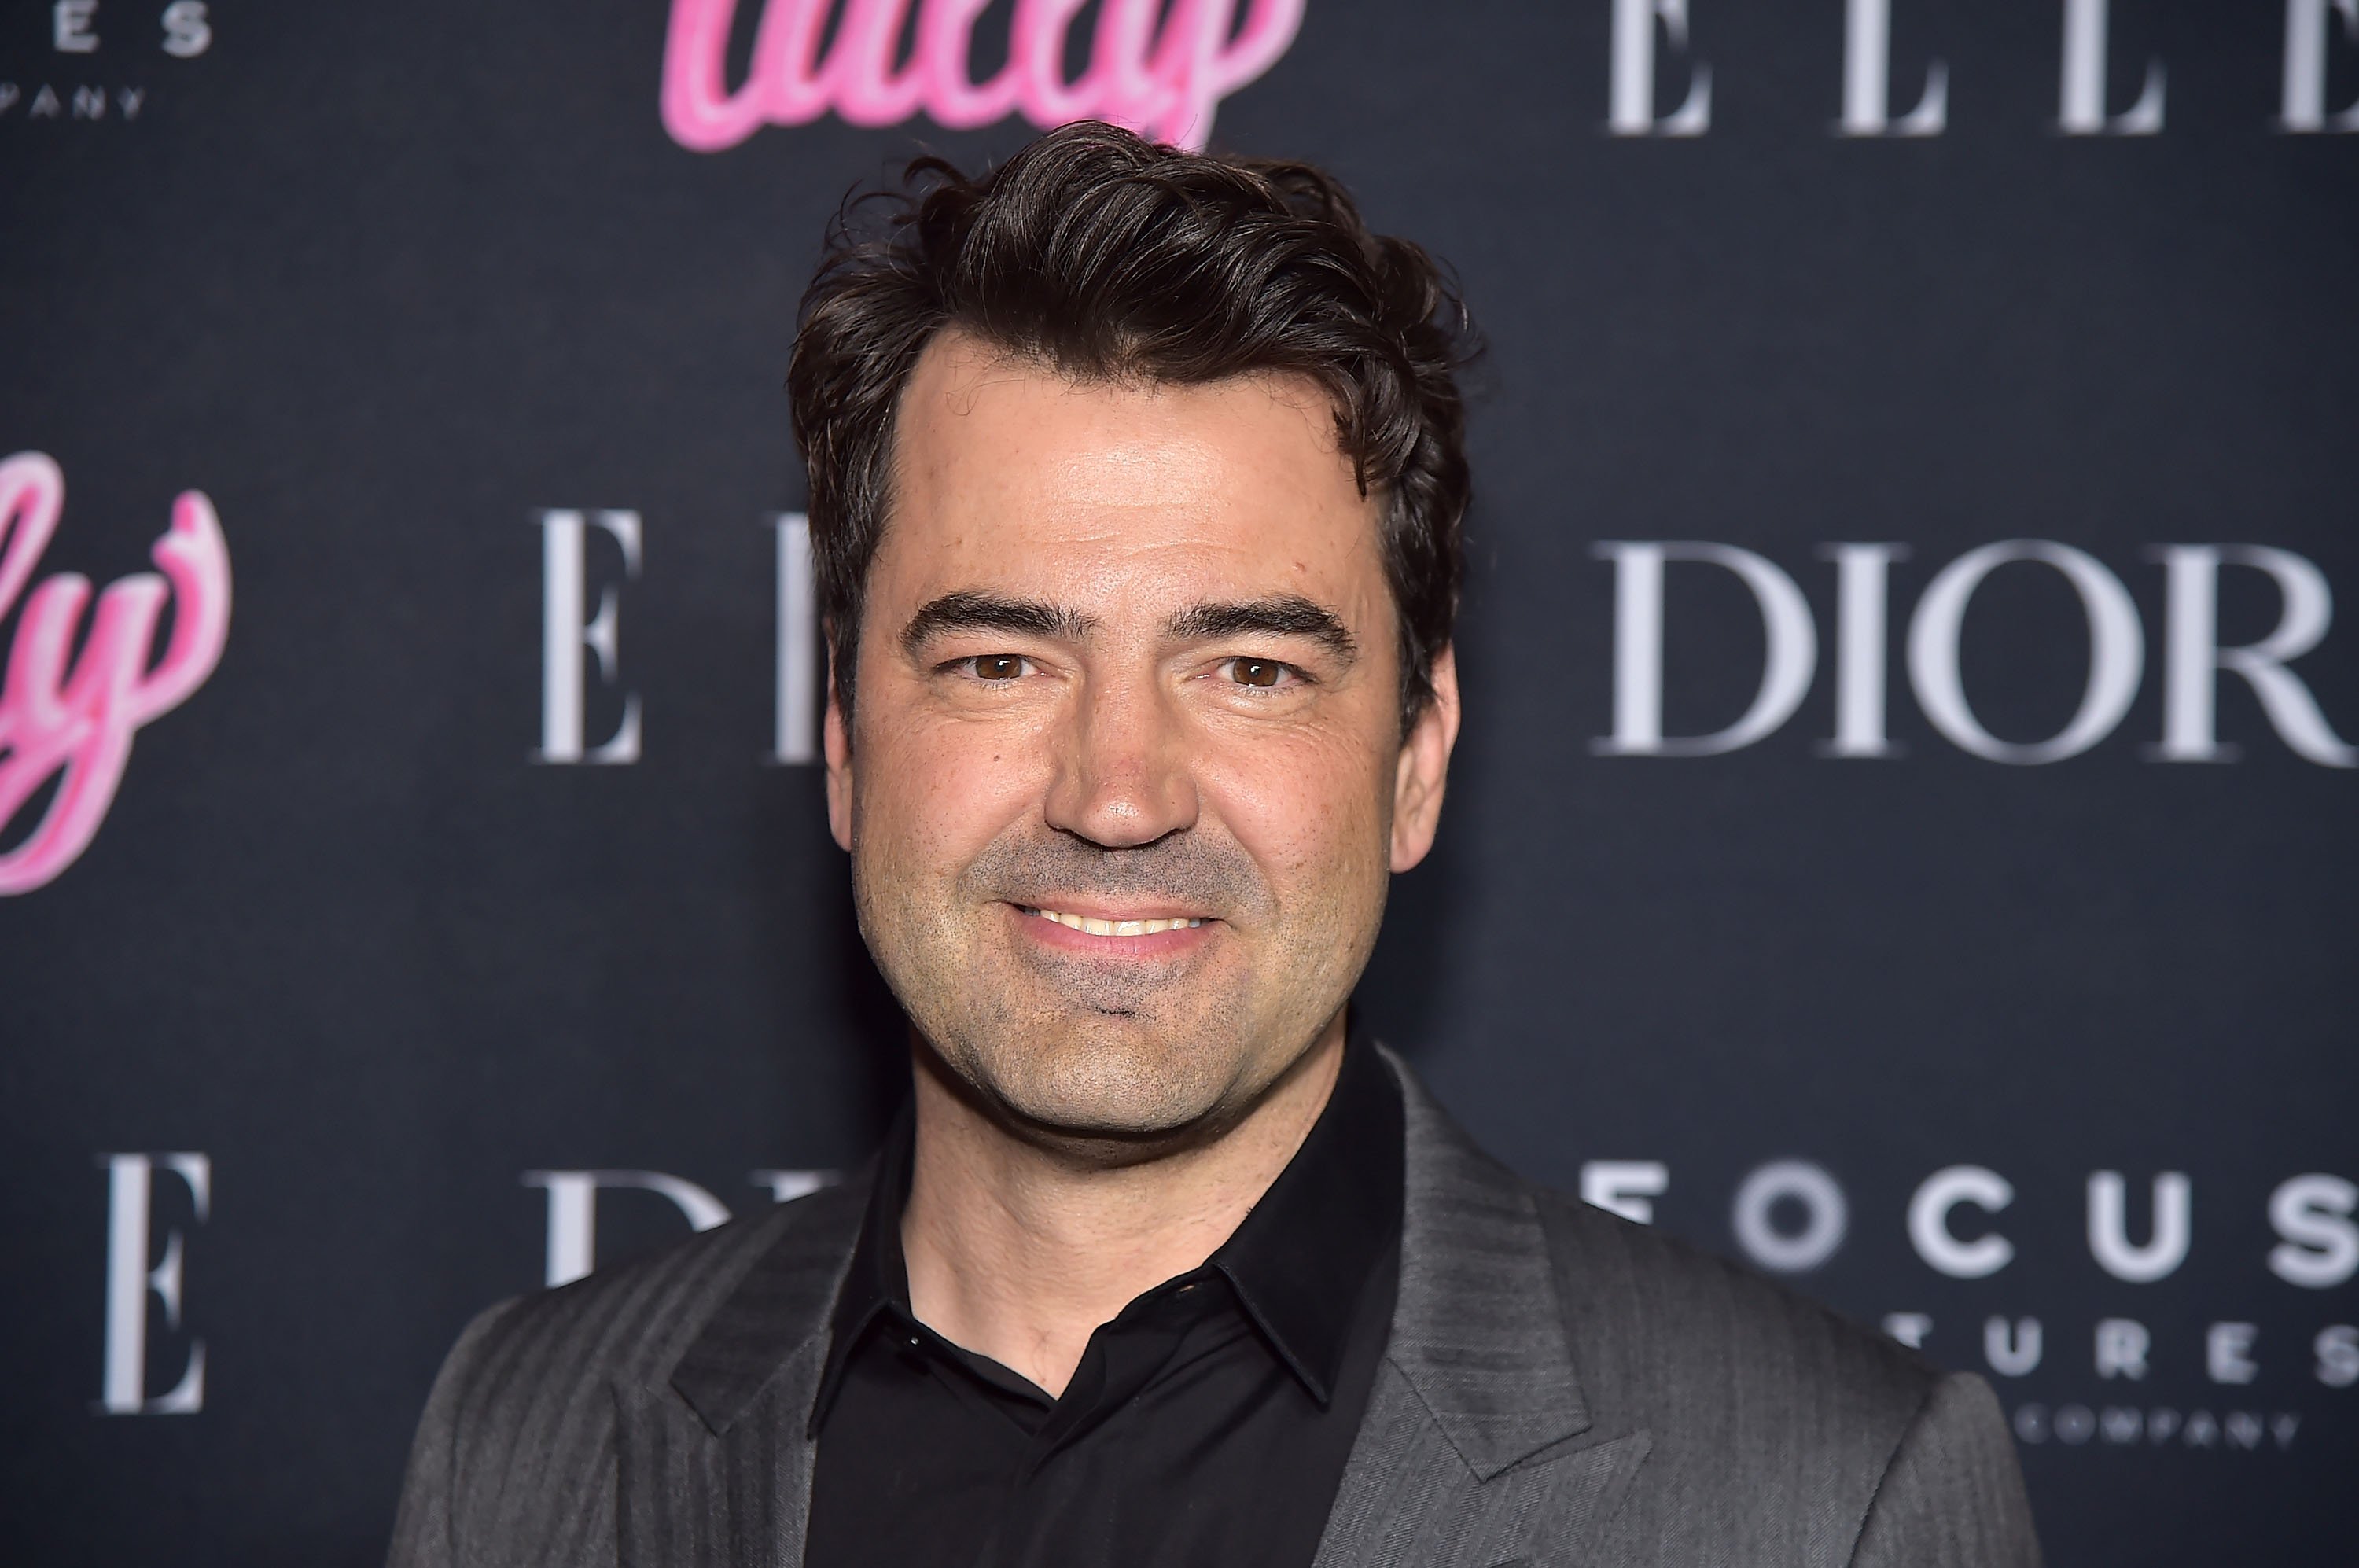 Ron Livingston attends the New York screening of 'Tully' in 2018